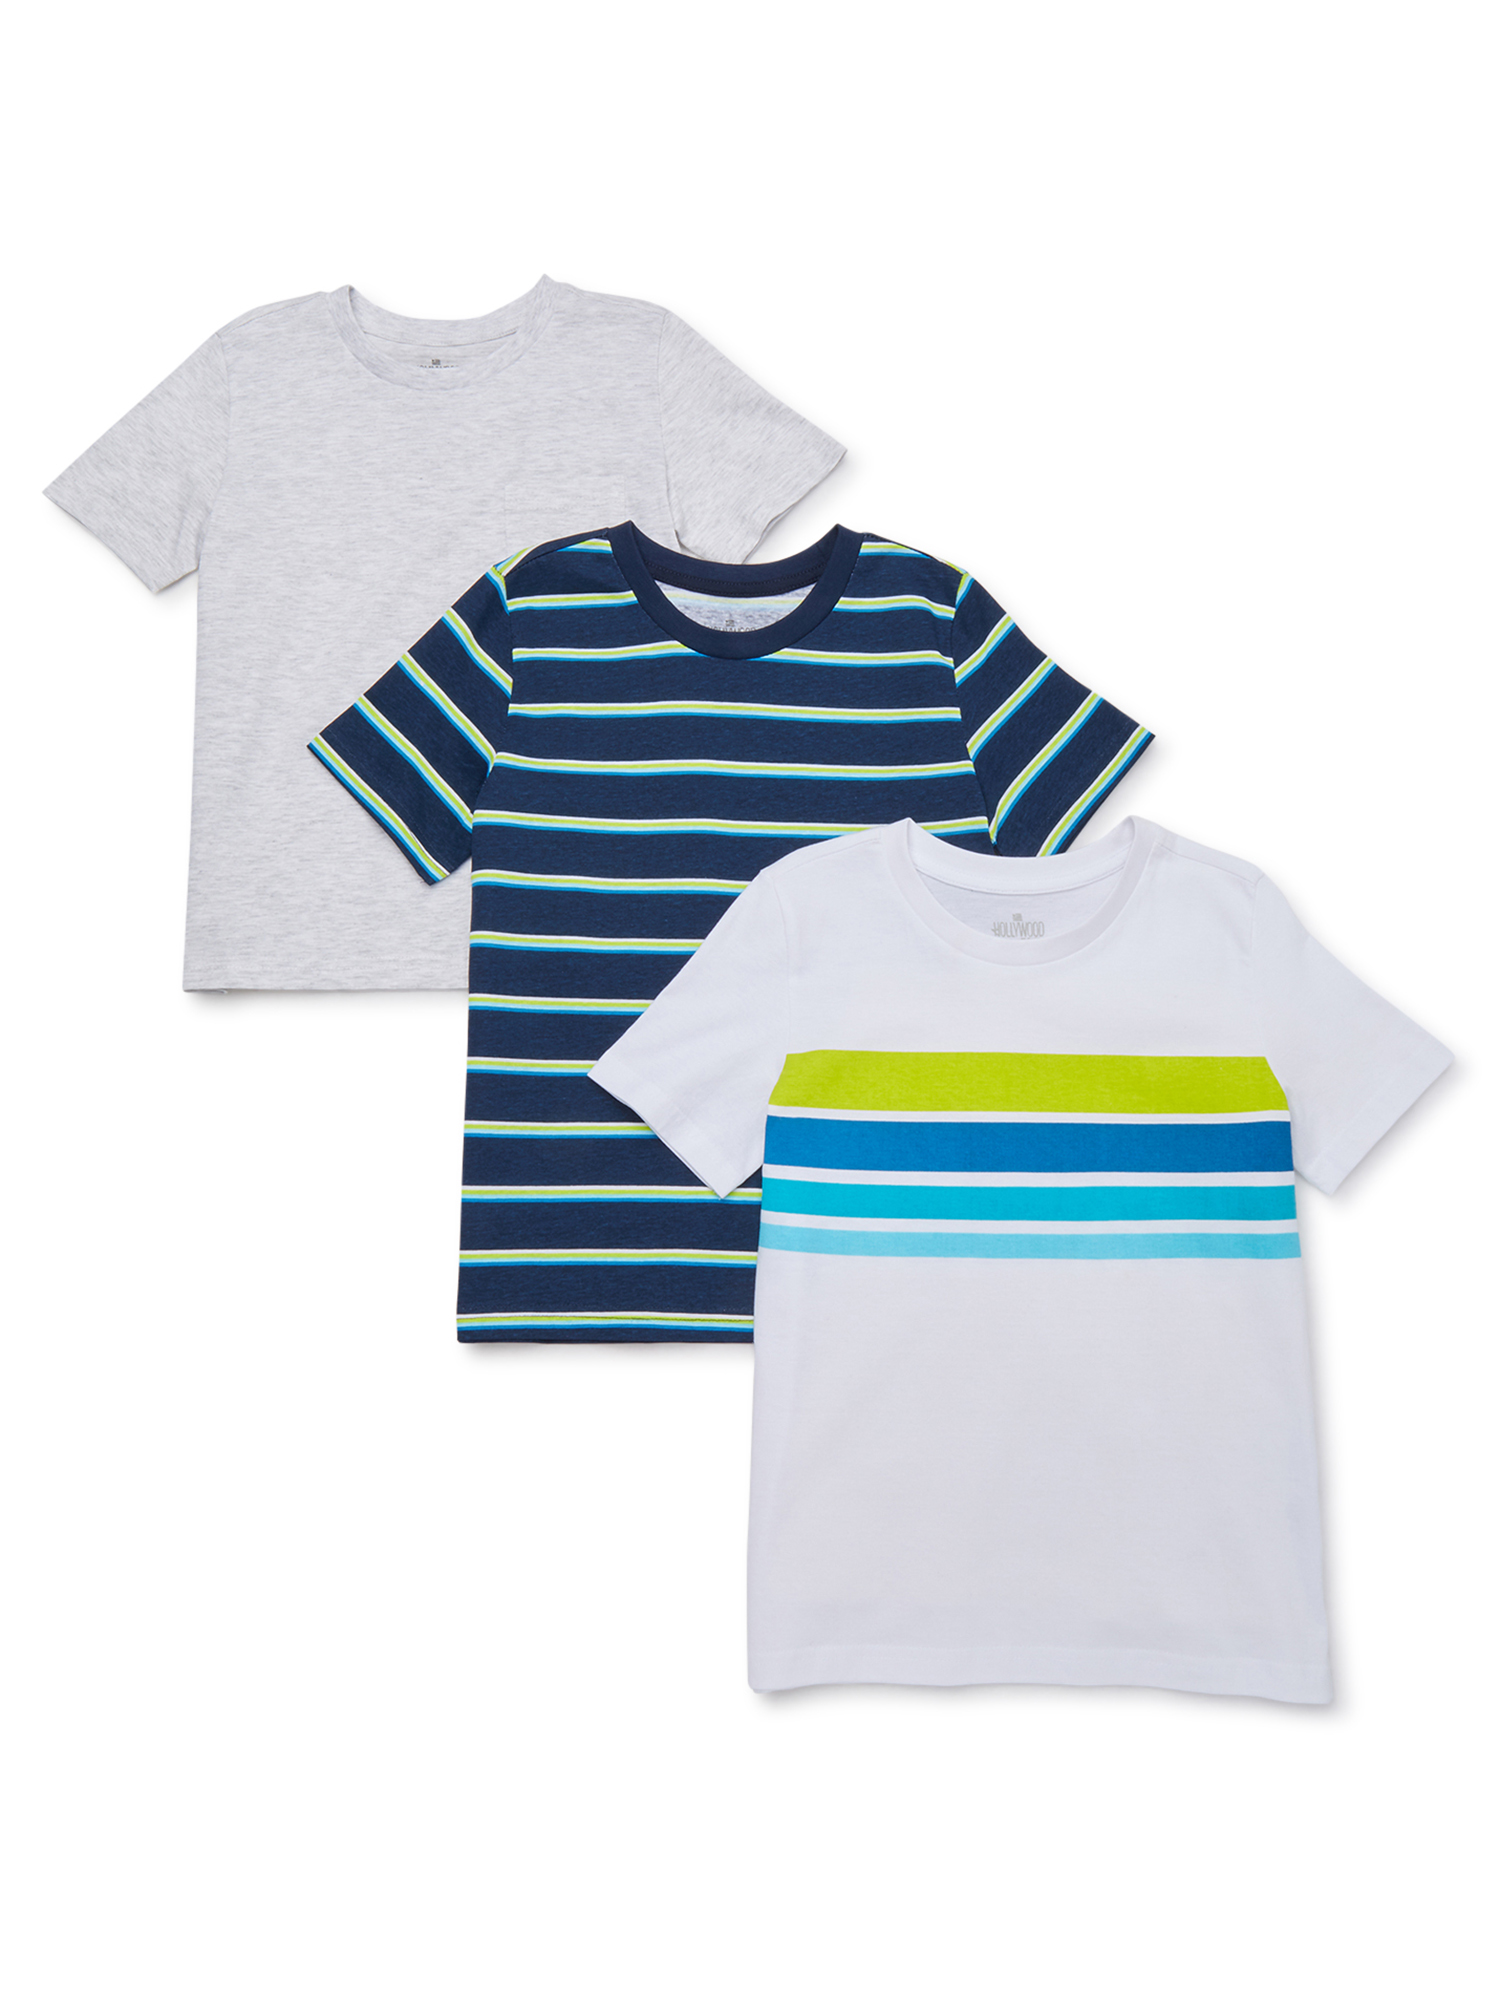 Hollywood Boys Stripe & Solid Short Sleeve T-Shirt 3 Pack Sizes 4-18 - image 1 of 3